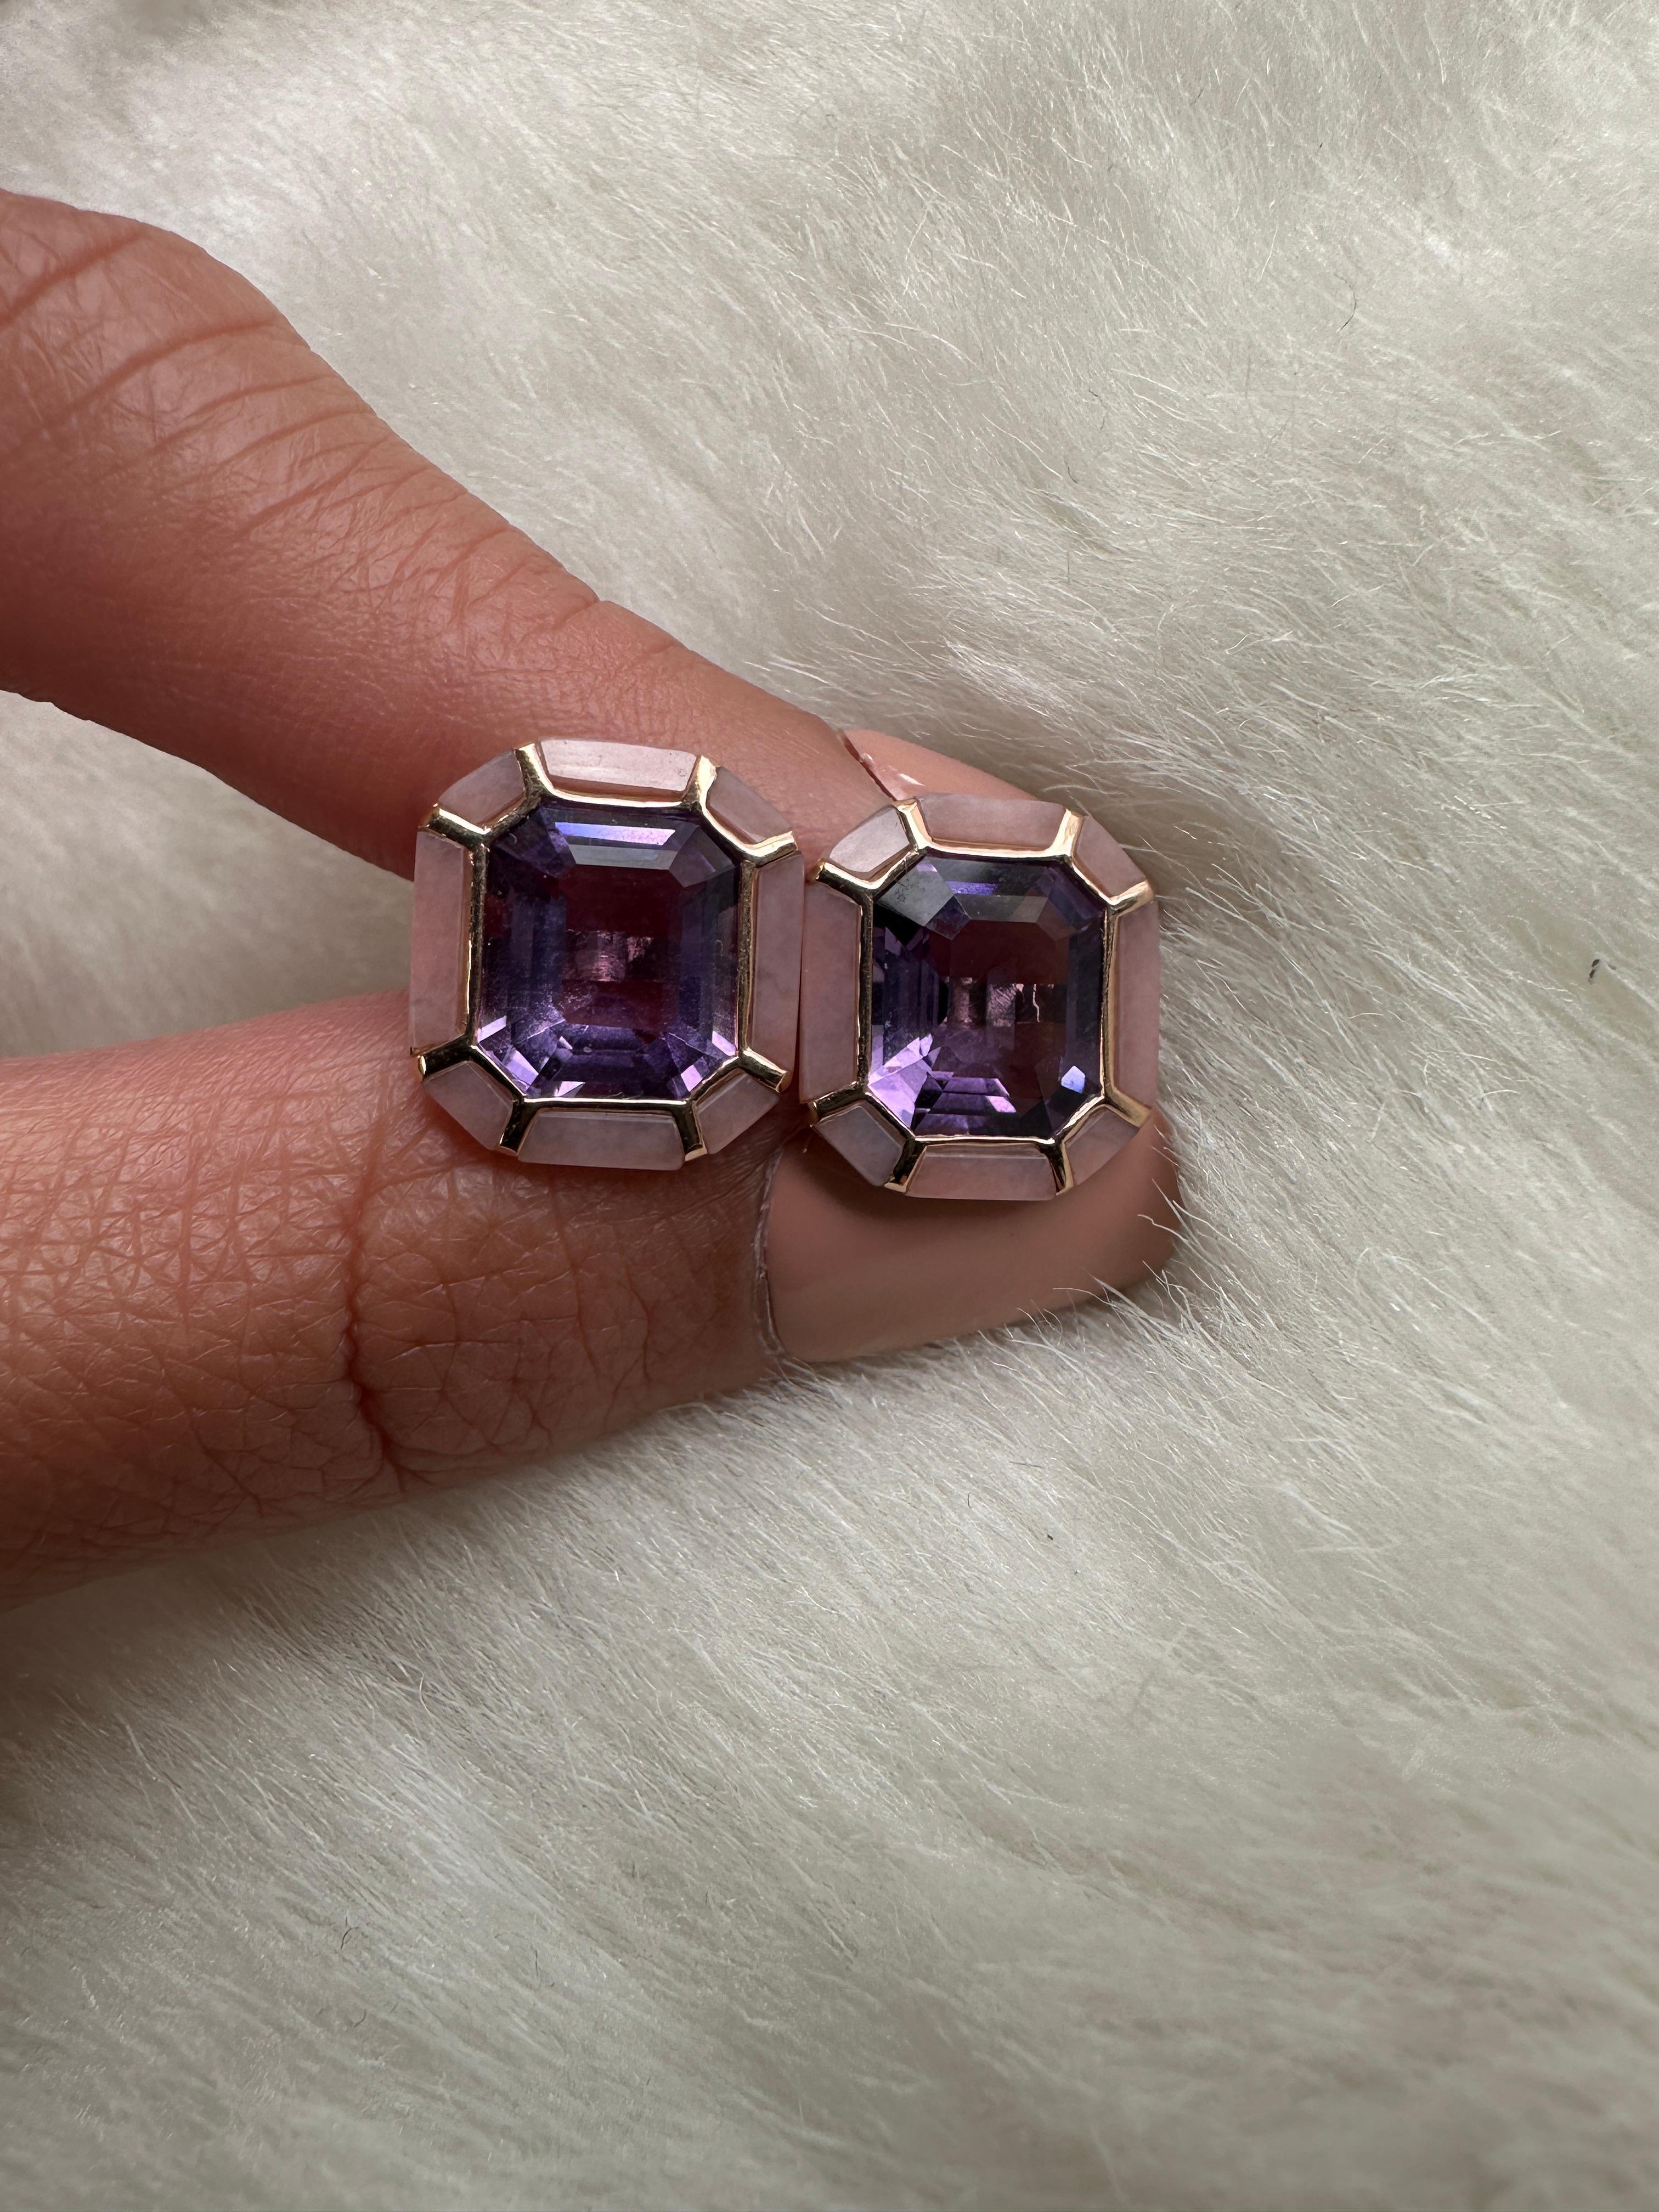 The Amethyst & Pink Opal Stud Earrings from the 'Melange' Collection showcase a captivating blend of elegance and charm. Crafted with exquisite attention to detail, these earrings feature stunning emerald cut amethyst and pink opal gemstones set in